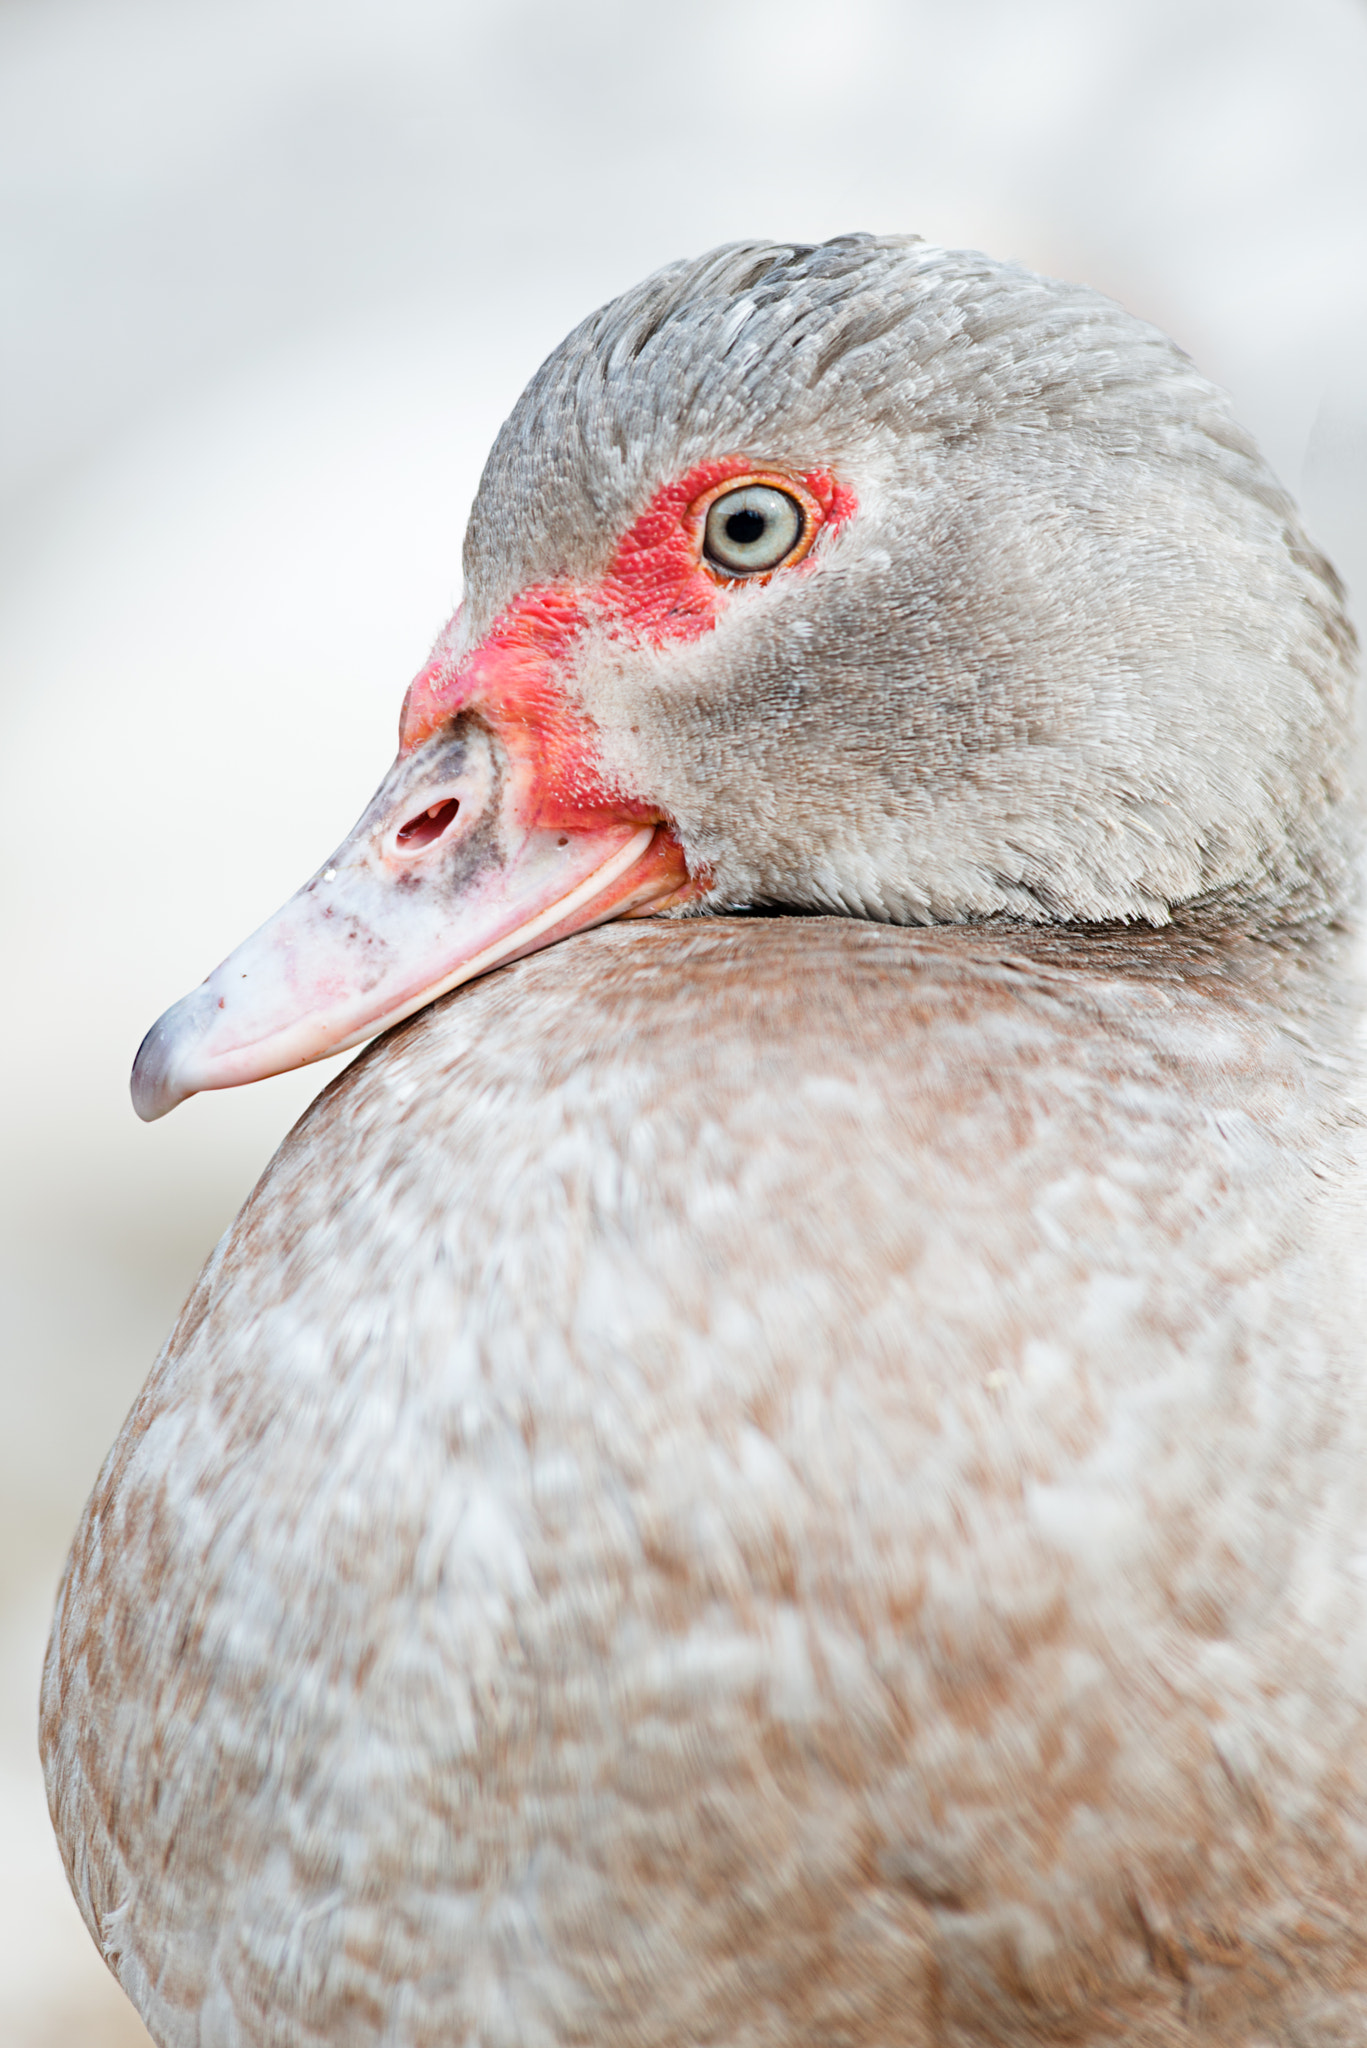 Nikon D800 sample photo. Duck breeds with red beak on a farm photography